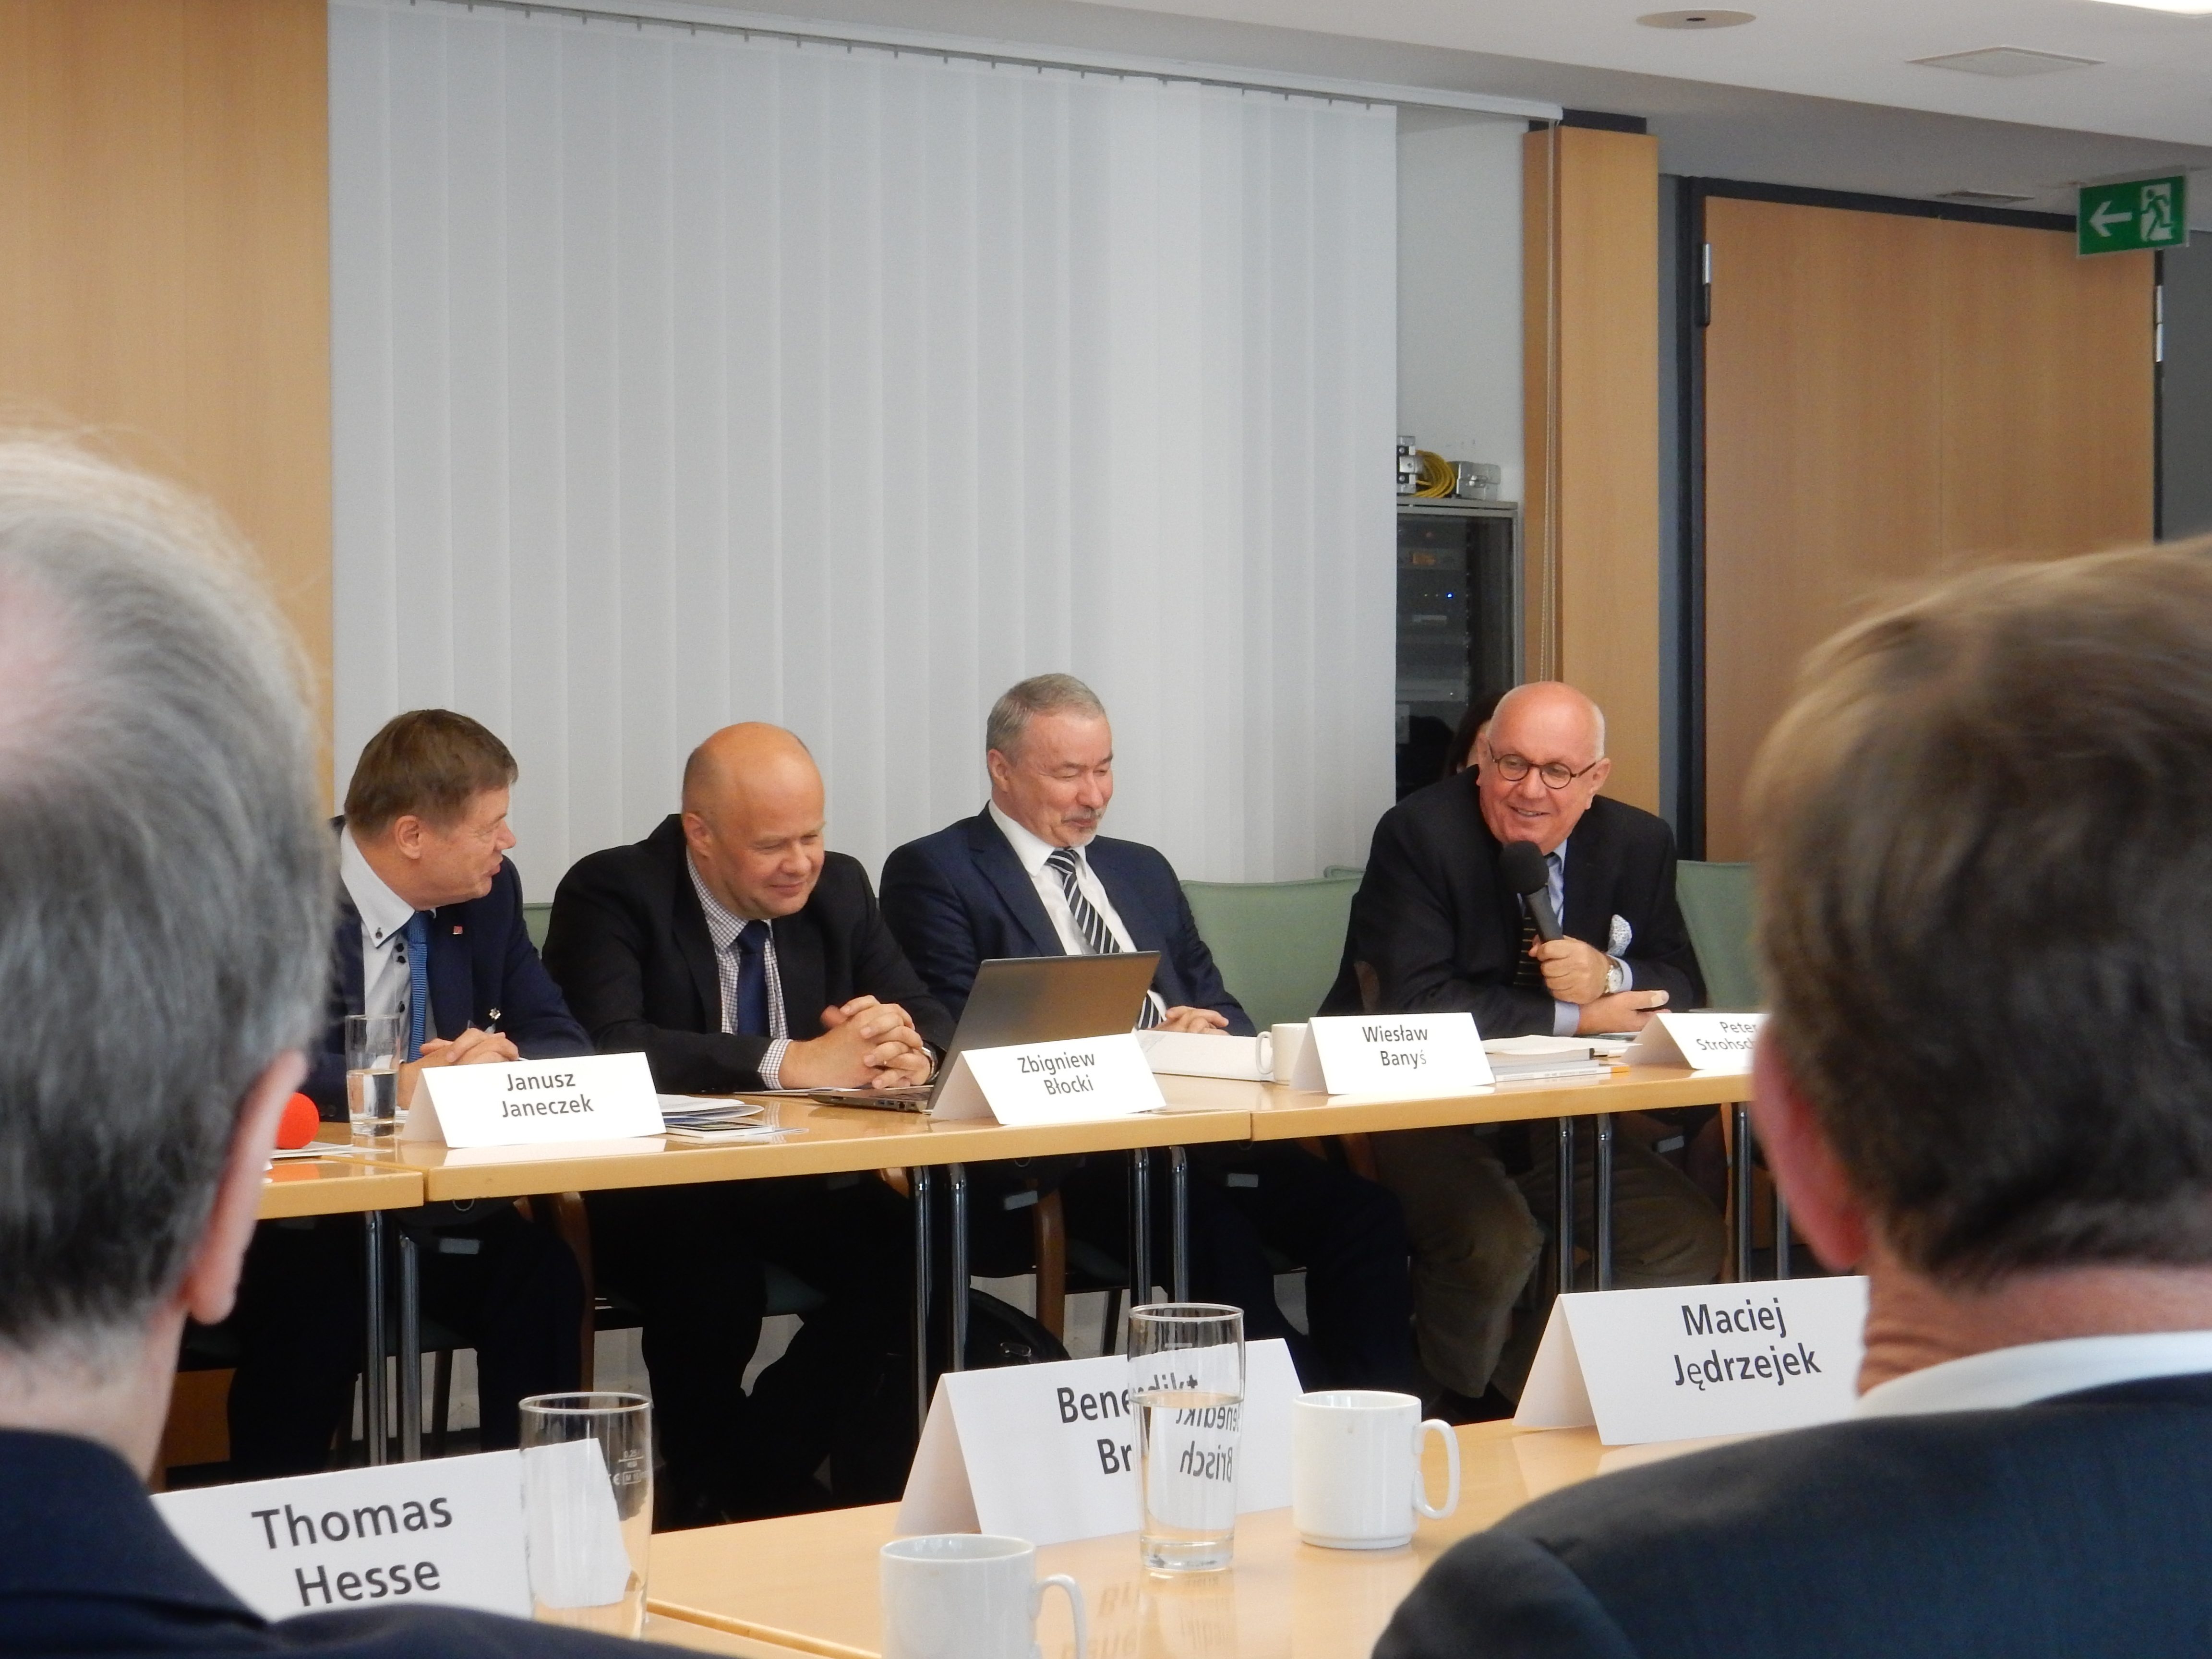 In conversation: DFG President Prof. Dr. Peter Strohschneider with the honorary president of the Conference of Rectors of Academic Schools in Poland, Prof. Dr. hab. Wiesław Banyś, NCN director Prof. Dr. hab. Zbigniew Błocki and the chair of the Counc